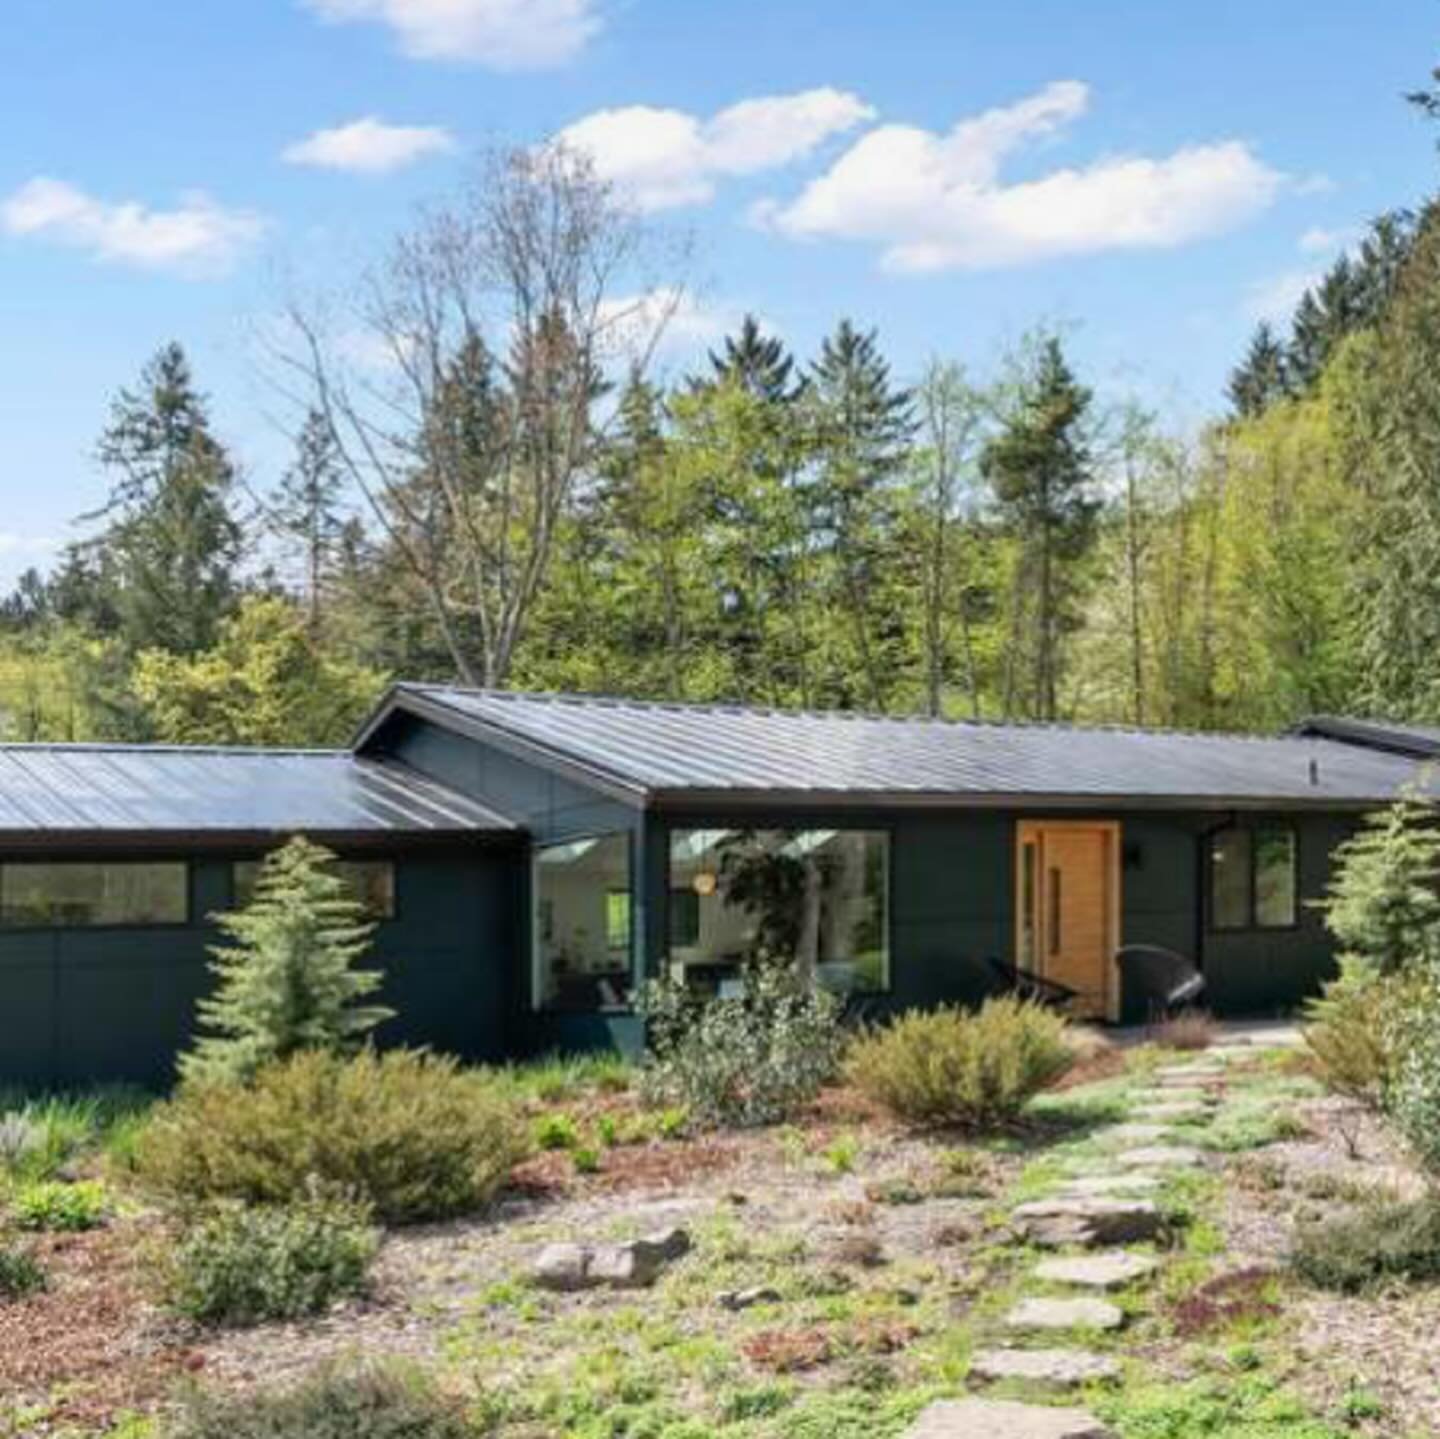 The coolest house on the prettiest day ever in Portland. 

4 bed | 2 bath | 2,587 sq ft | 1.075M

From the listing:
Stunning Custom Design in Idyllic NW Hills Landscape. This holistically renovated designer home, nestled in the picturesque Folkenberg